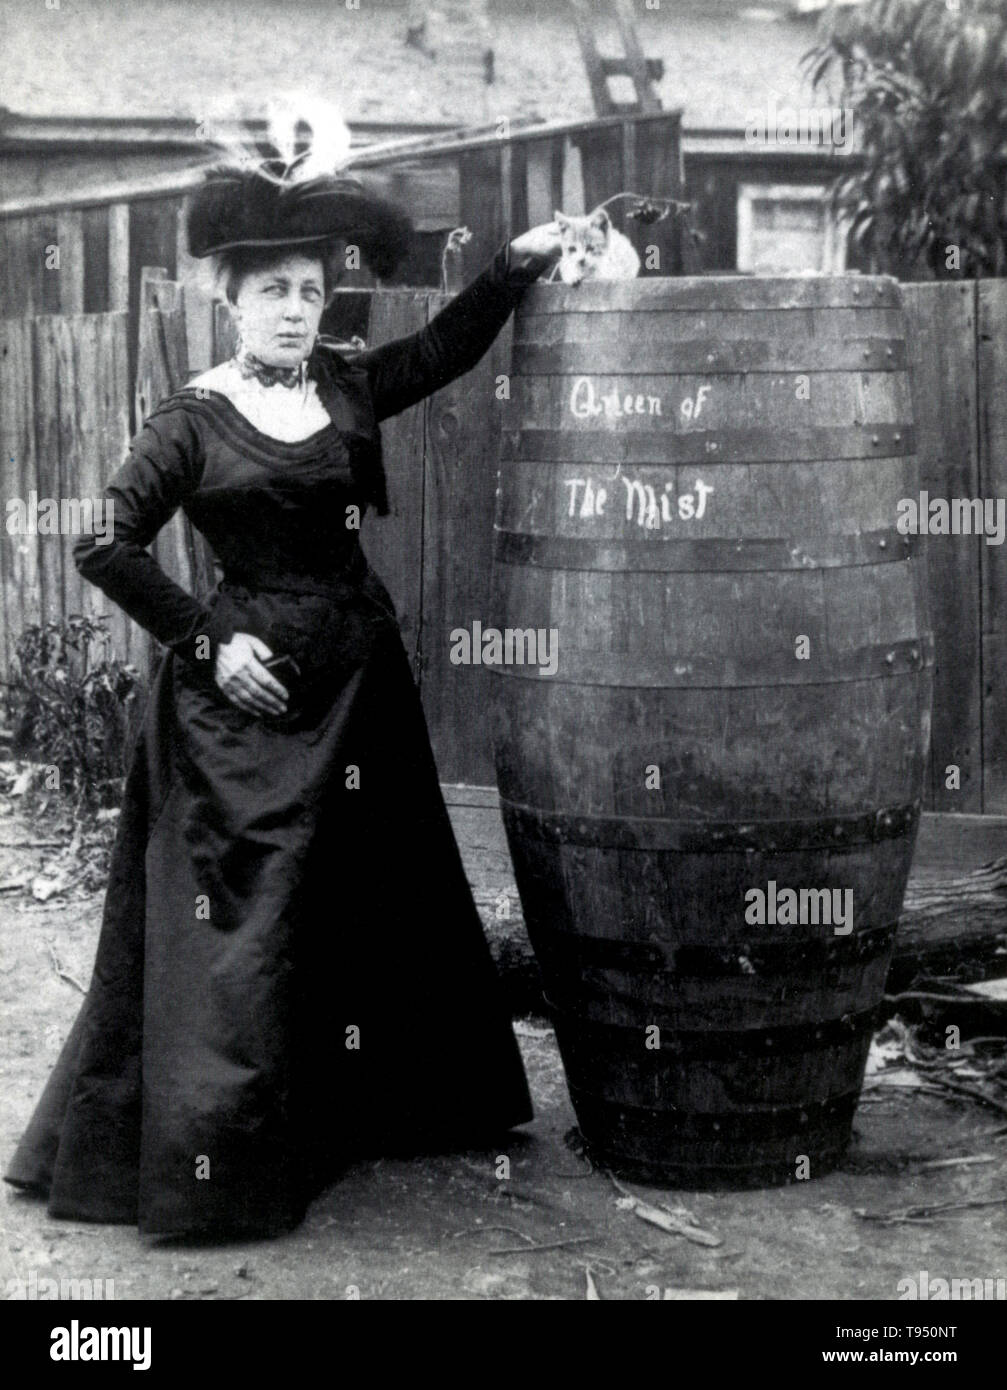 Annie Edson Taylor (October 24, 1838 - April 29, 1921) was an American teacher. Desiring to secure her later years financially, she decided she would be the first person to ride over Niagara Falls in a barrel. Taylor used a custom-made barrel for her trip, constructed of oak and iron and padded with a mattress. On October 24, 1901, her 63rd birthday, the barrel was put over the side of a rowboat, and Taylor climbed in, along with her lucky heart-shaped pillow. Stock Photo